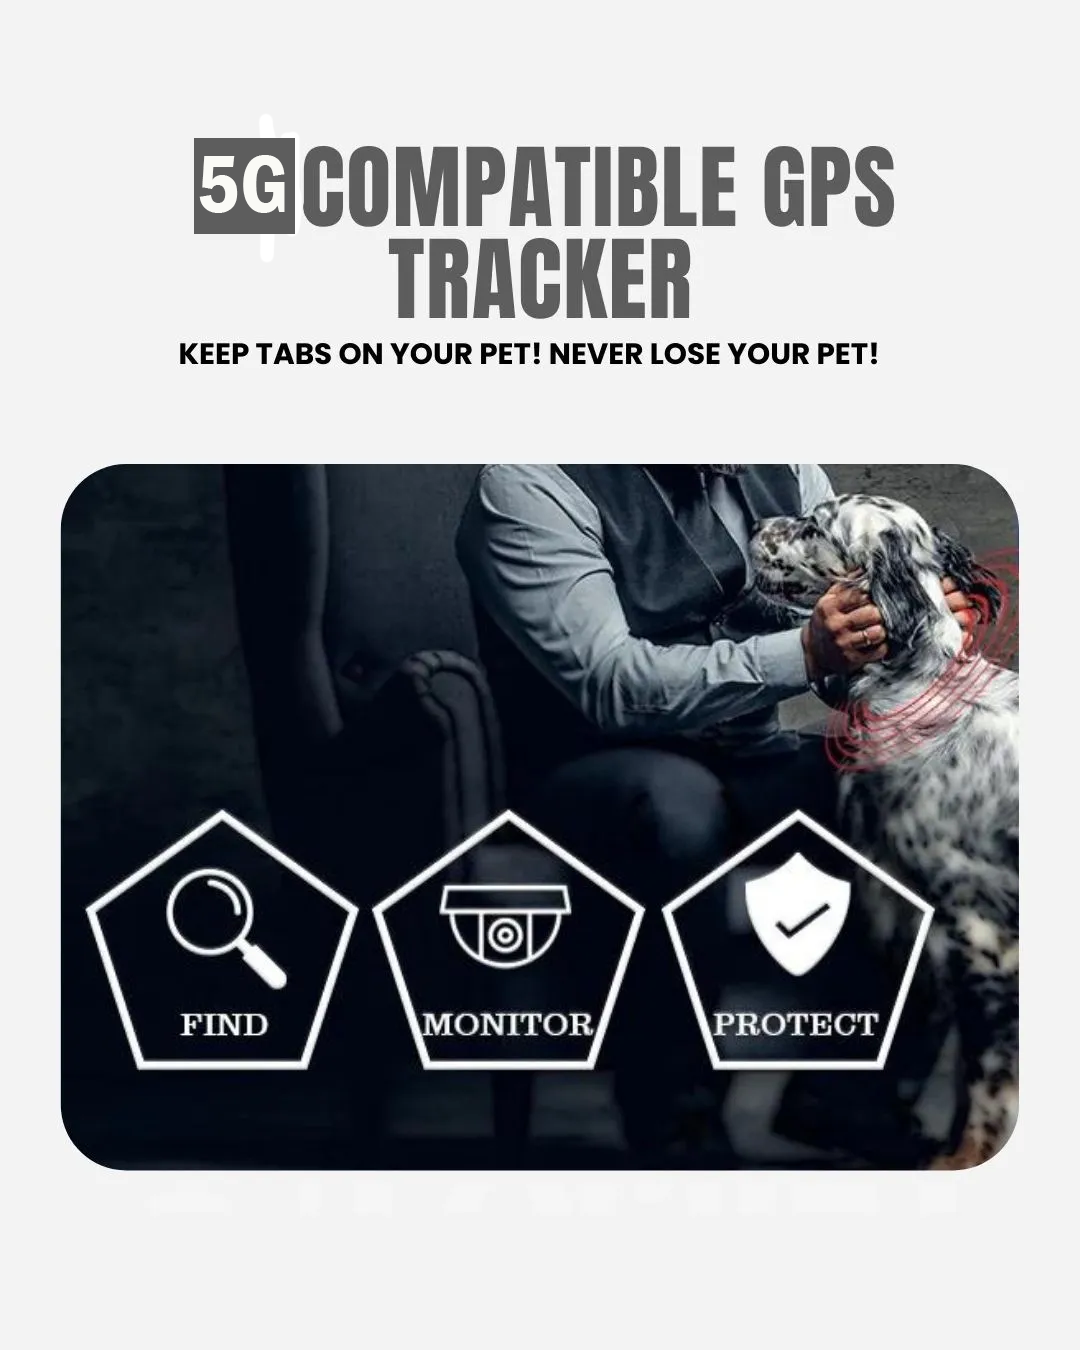 5G-enabled GPS tracking device for dogs